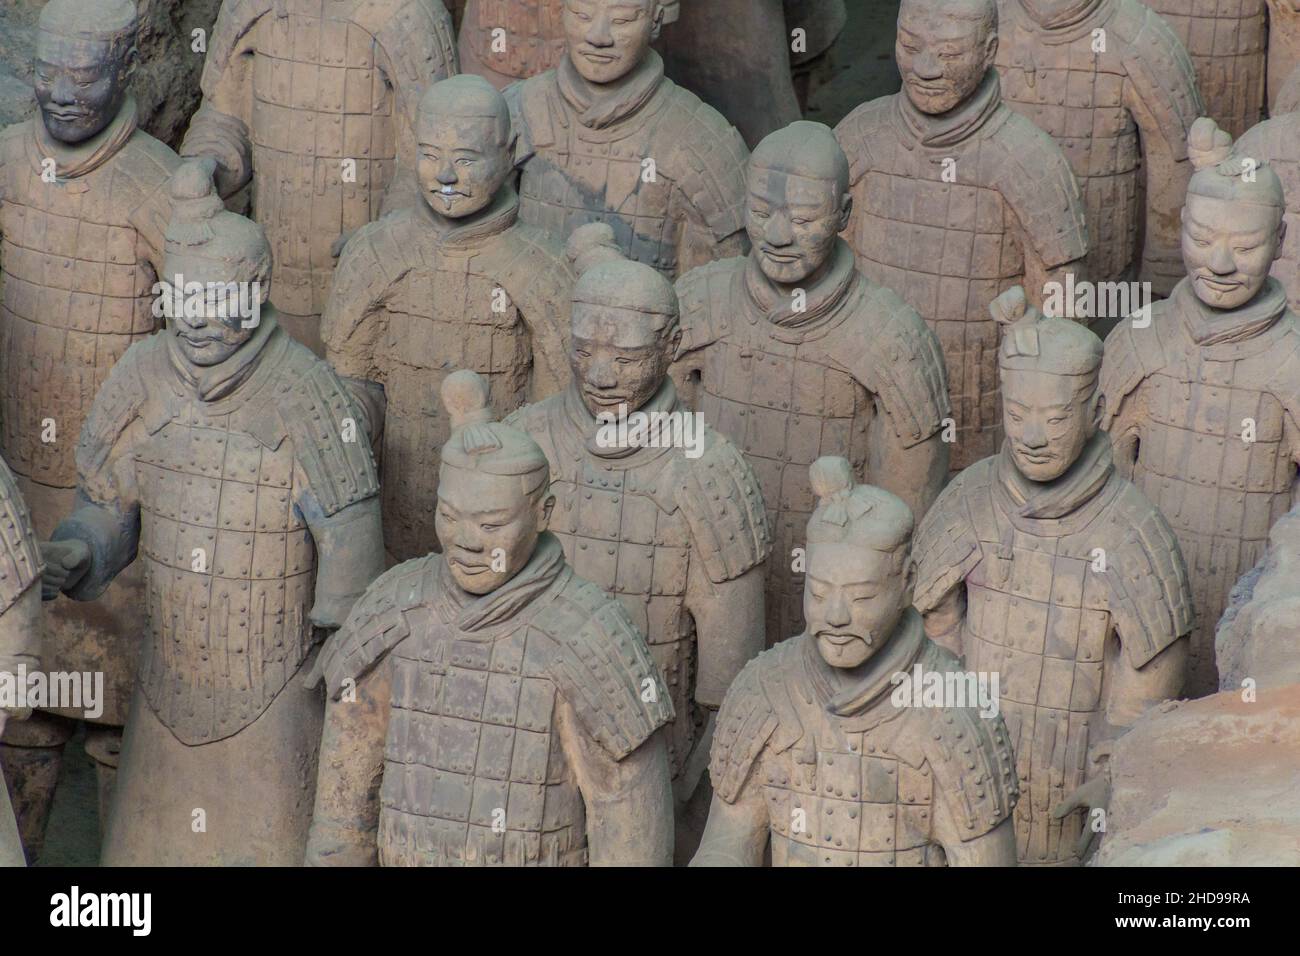 Soldiers in the Pit 1 of the Army of Terracotta Warriors near Xi'an, Shaanxi province, China Stock Photo